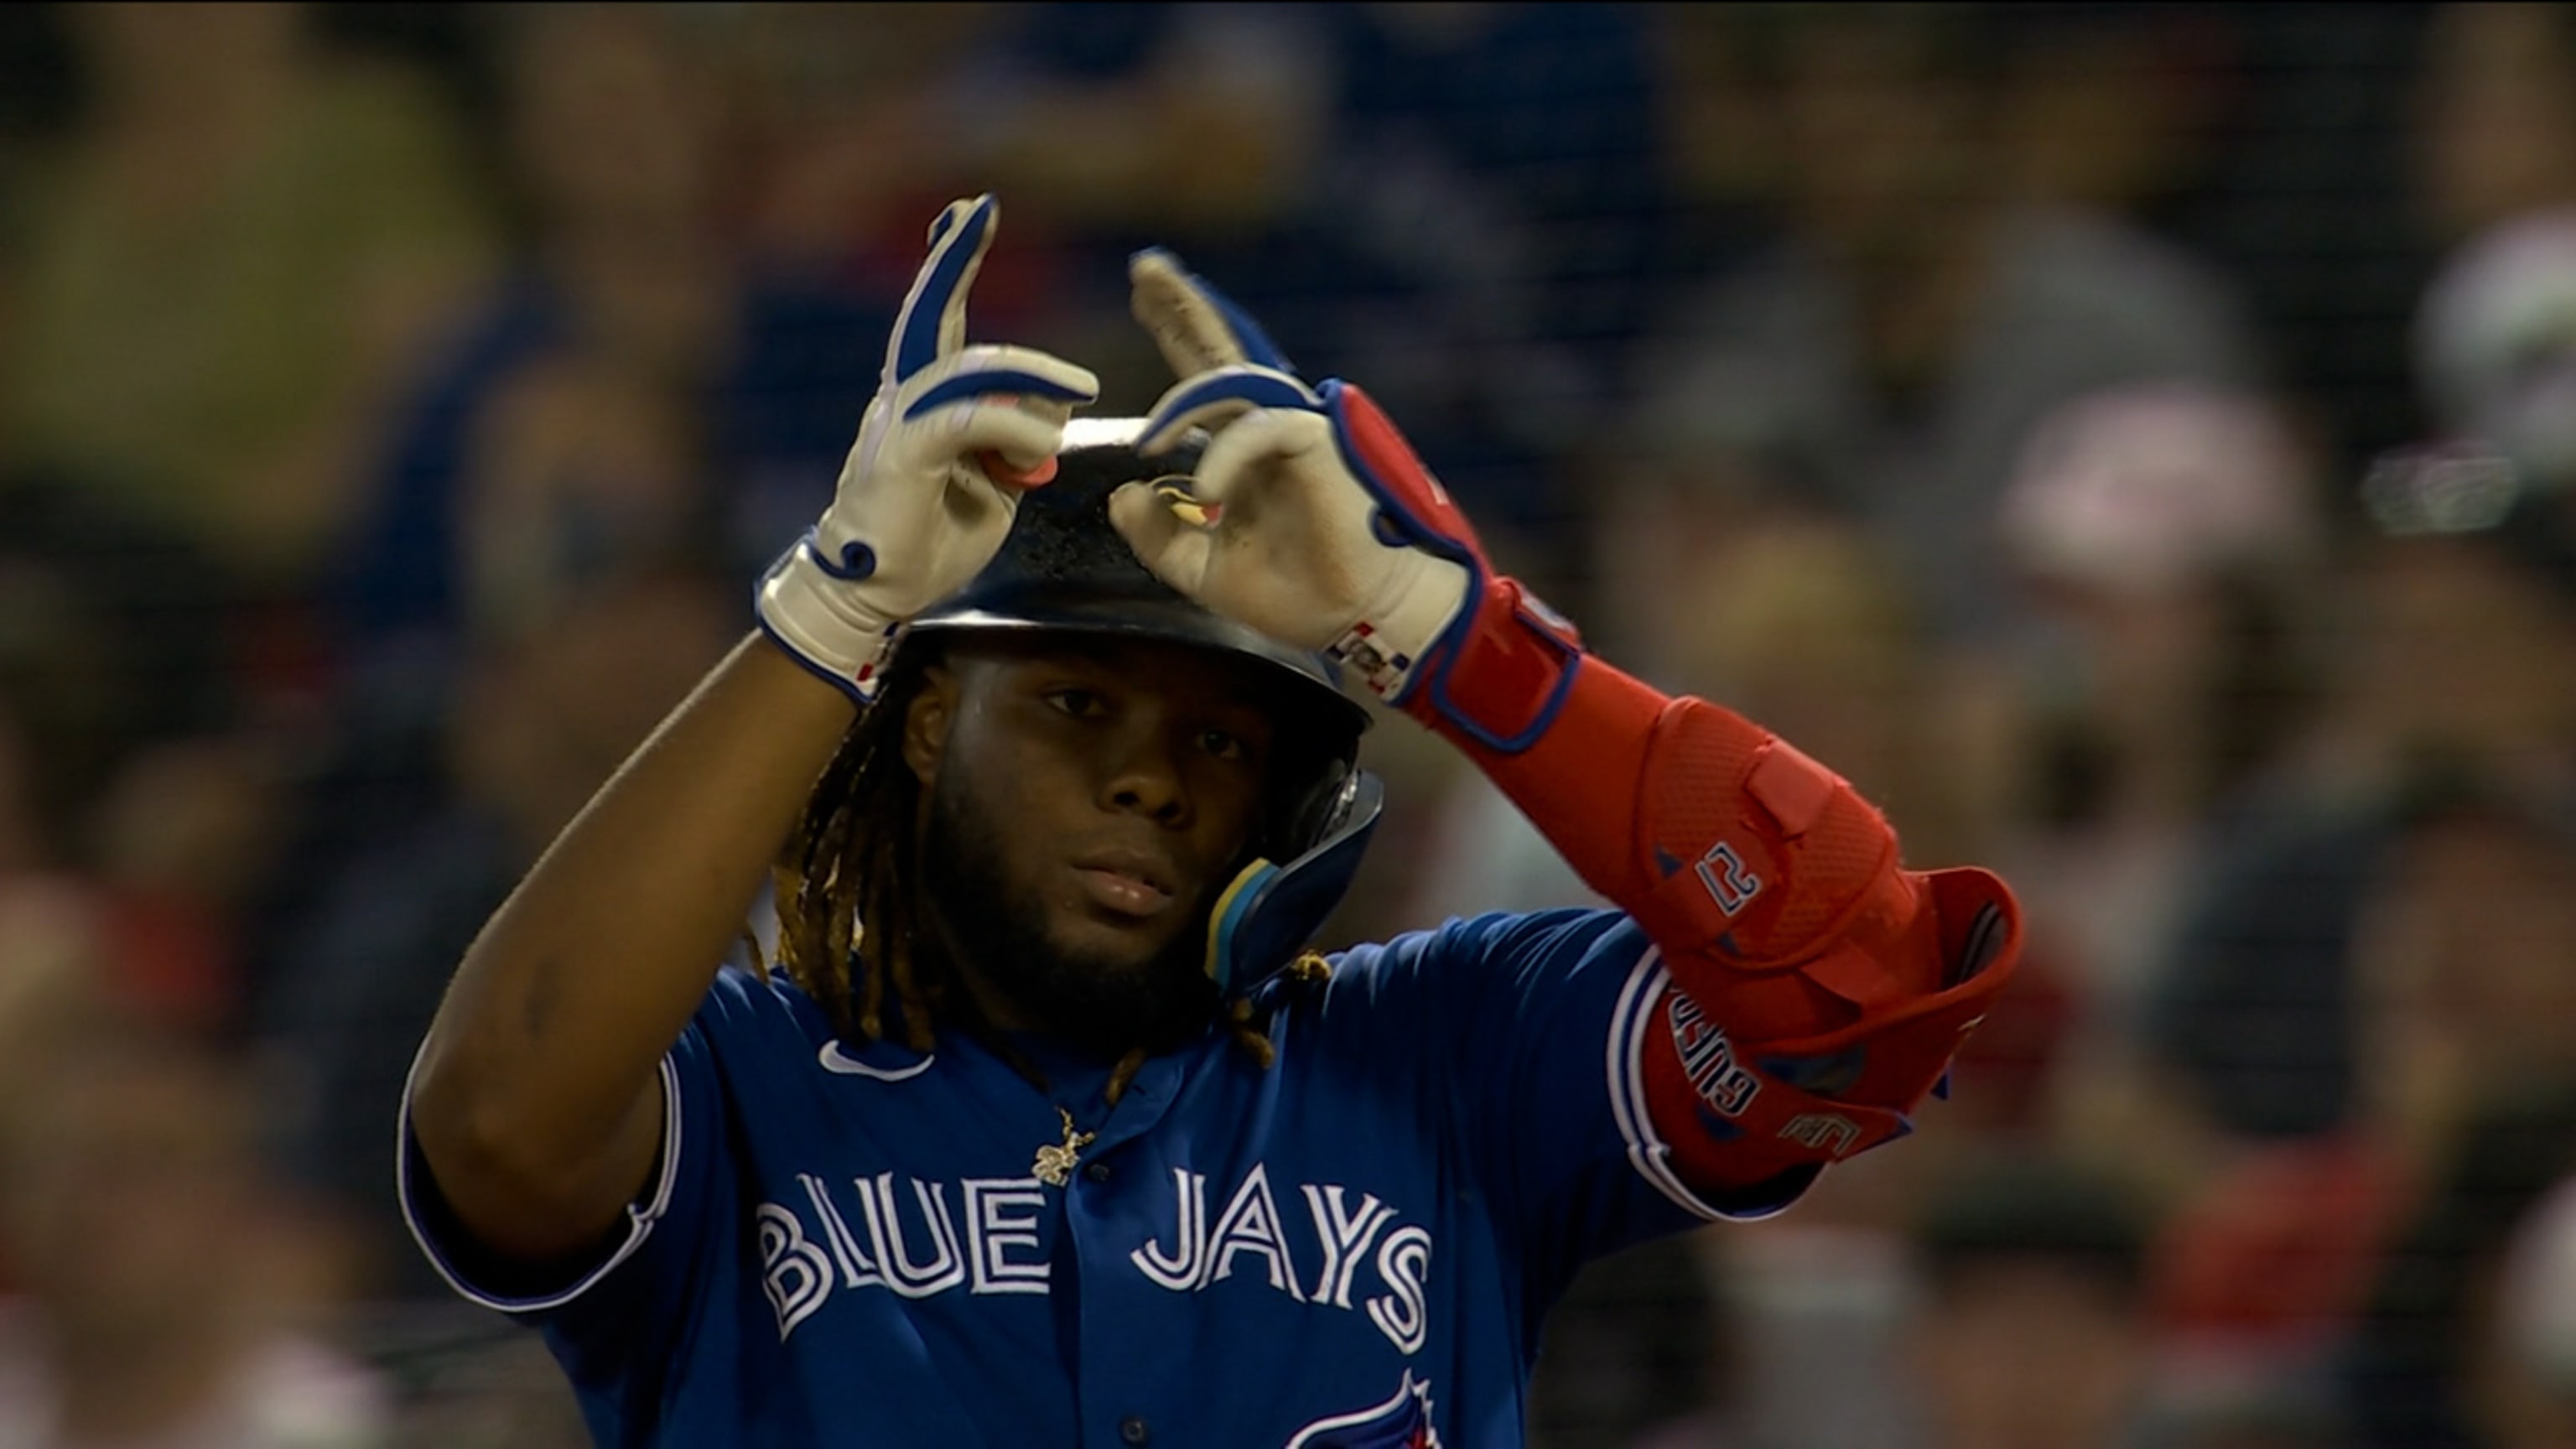 Blue Jays roll to franchise-record night, pound Red Sox 28-5